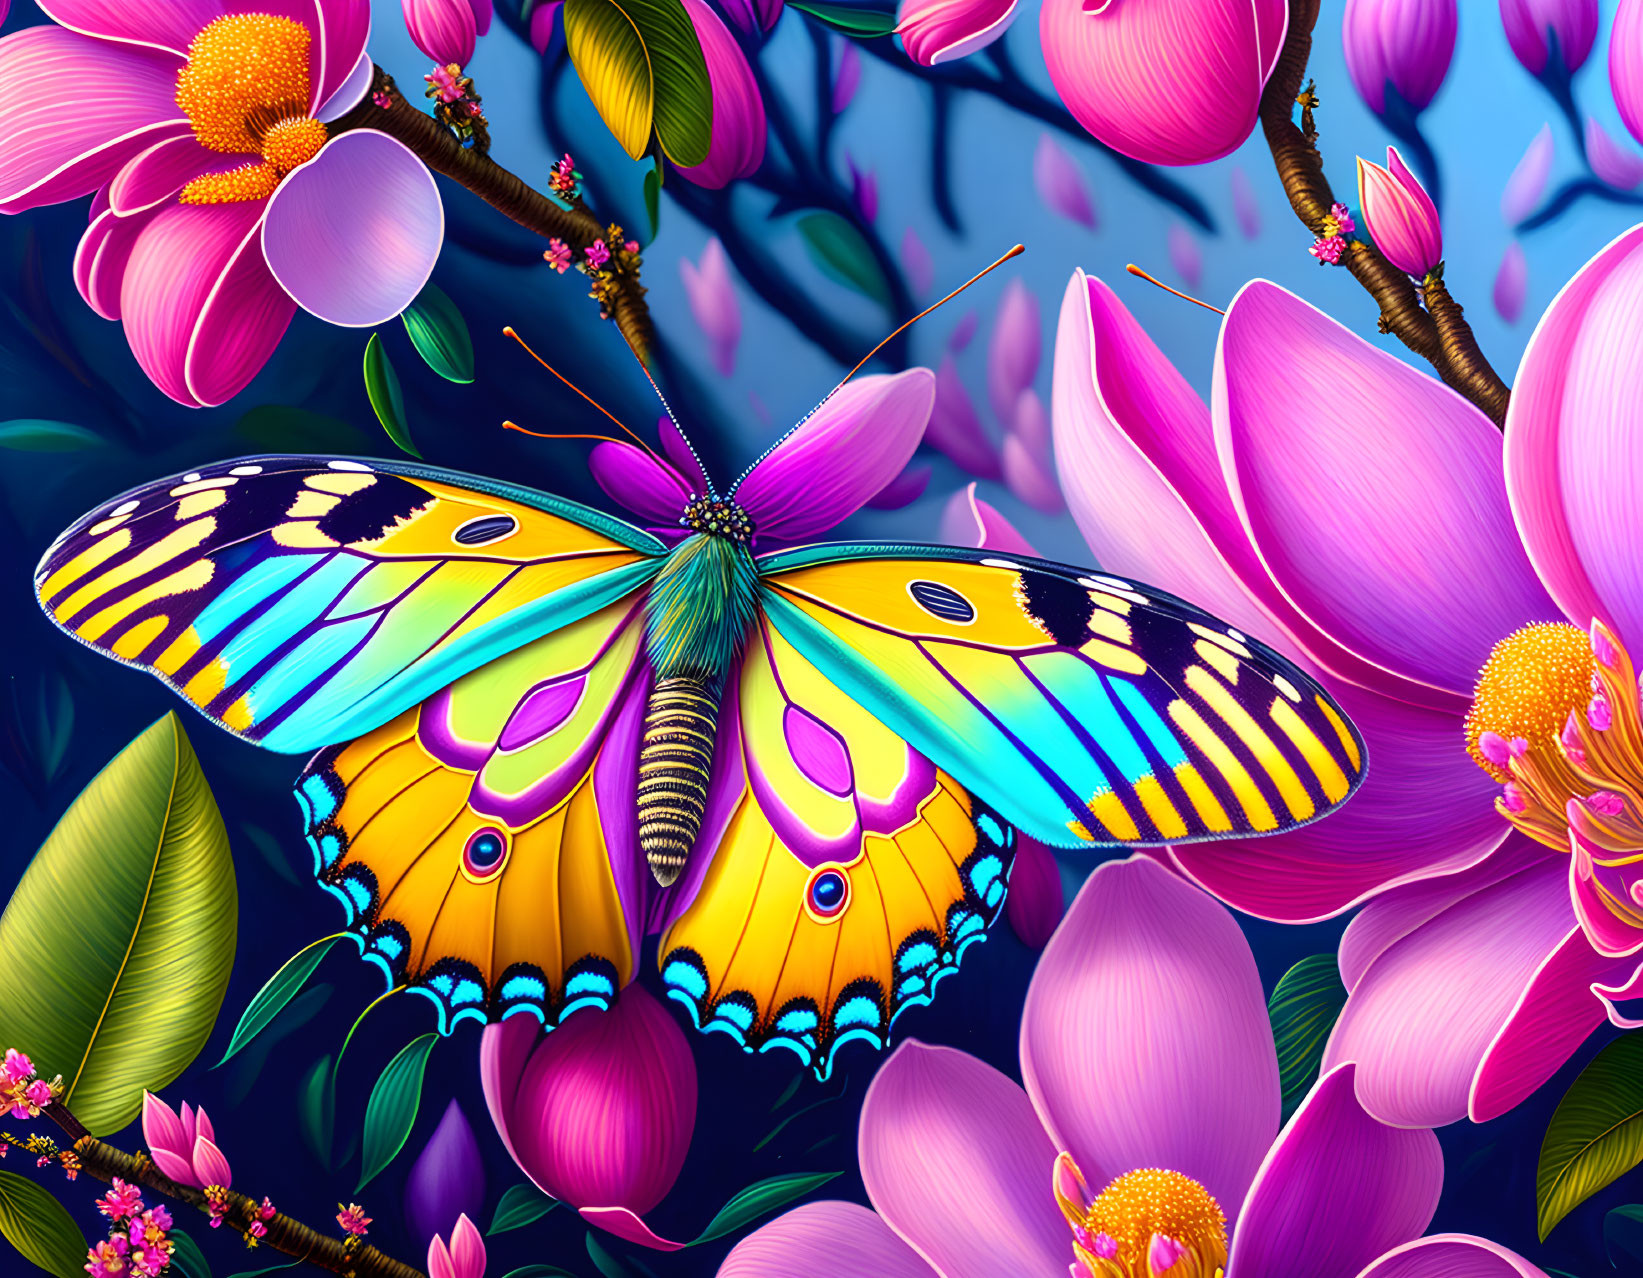 Colorful Butterfly on Pink Magnolia Flower Surrounded by Lush Greenery